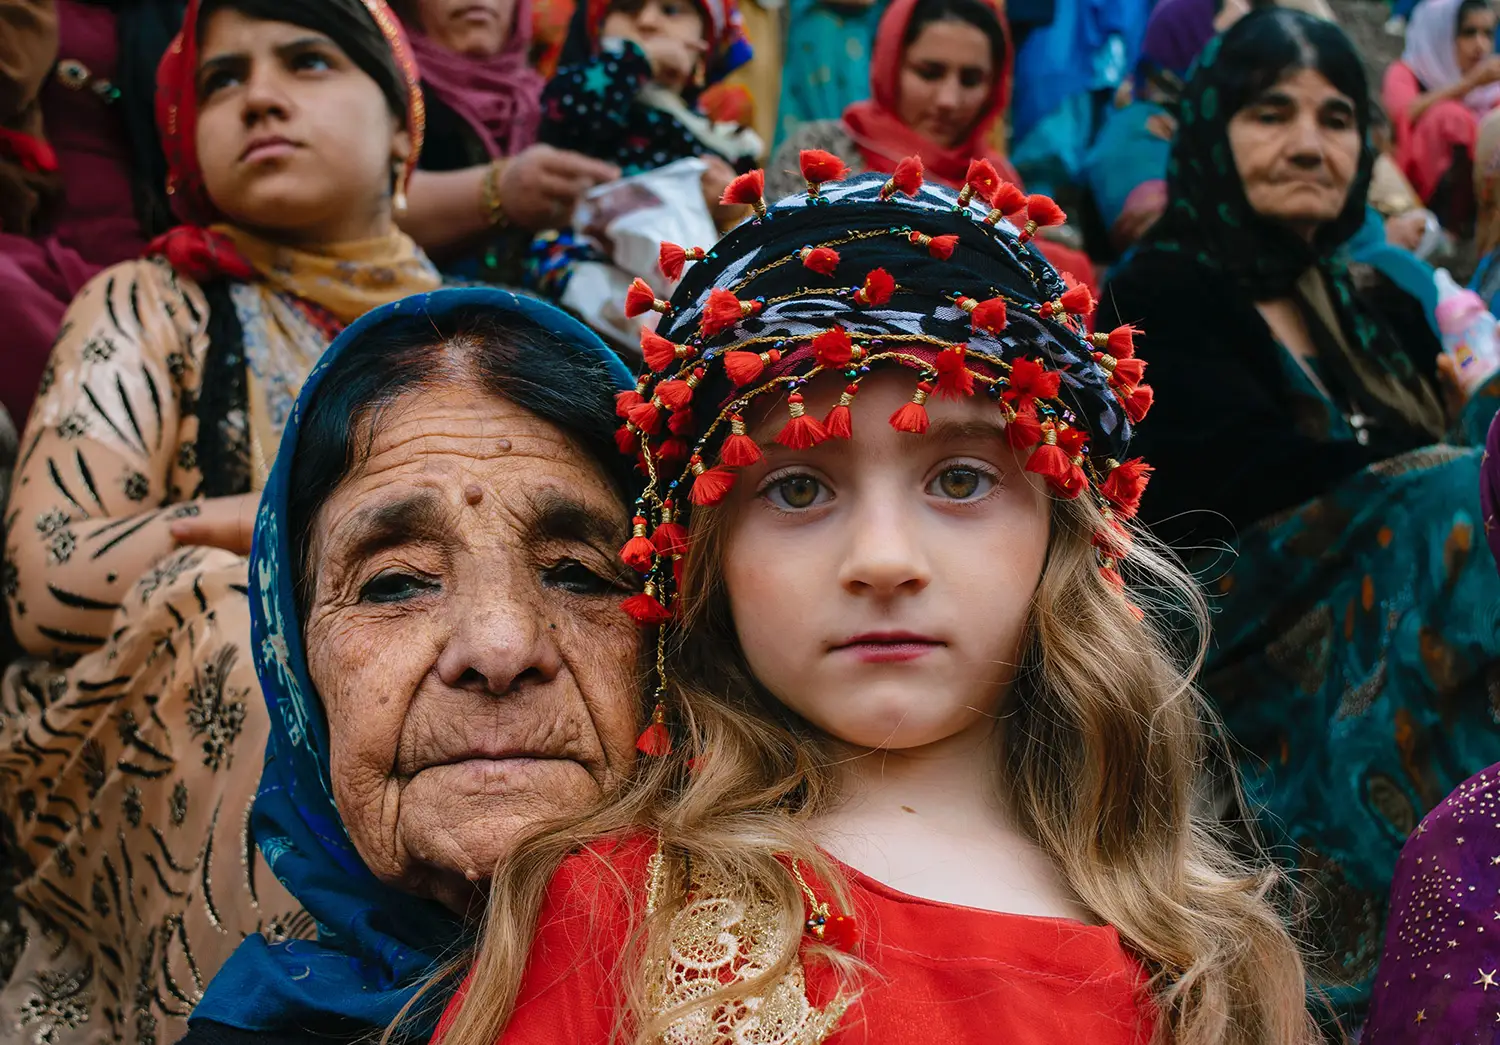 A grandmother and her grandchild watch the camera, as if deep in thought. The grandmother has deep set wrinkles, wears a blue headscarf, and leans close to the girl. The girl is wearing a red outfit with lace detailing. 